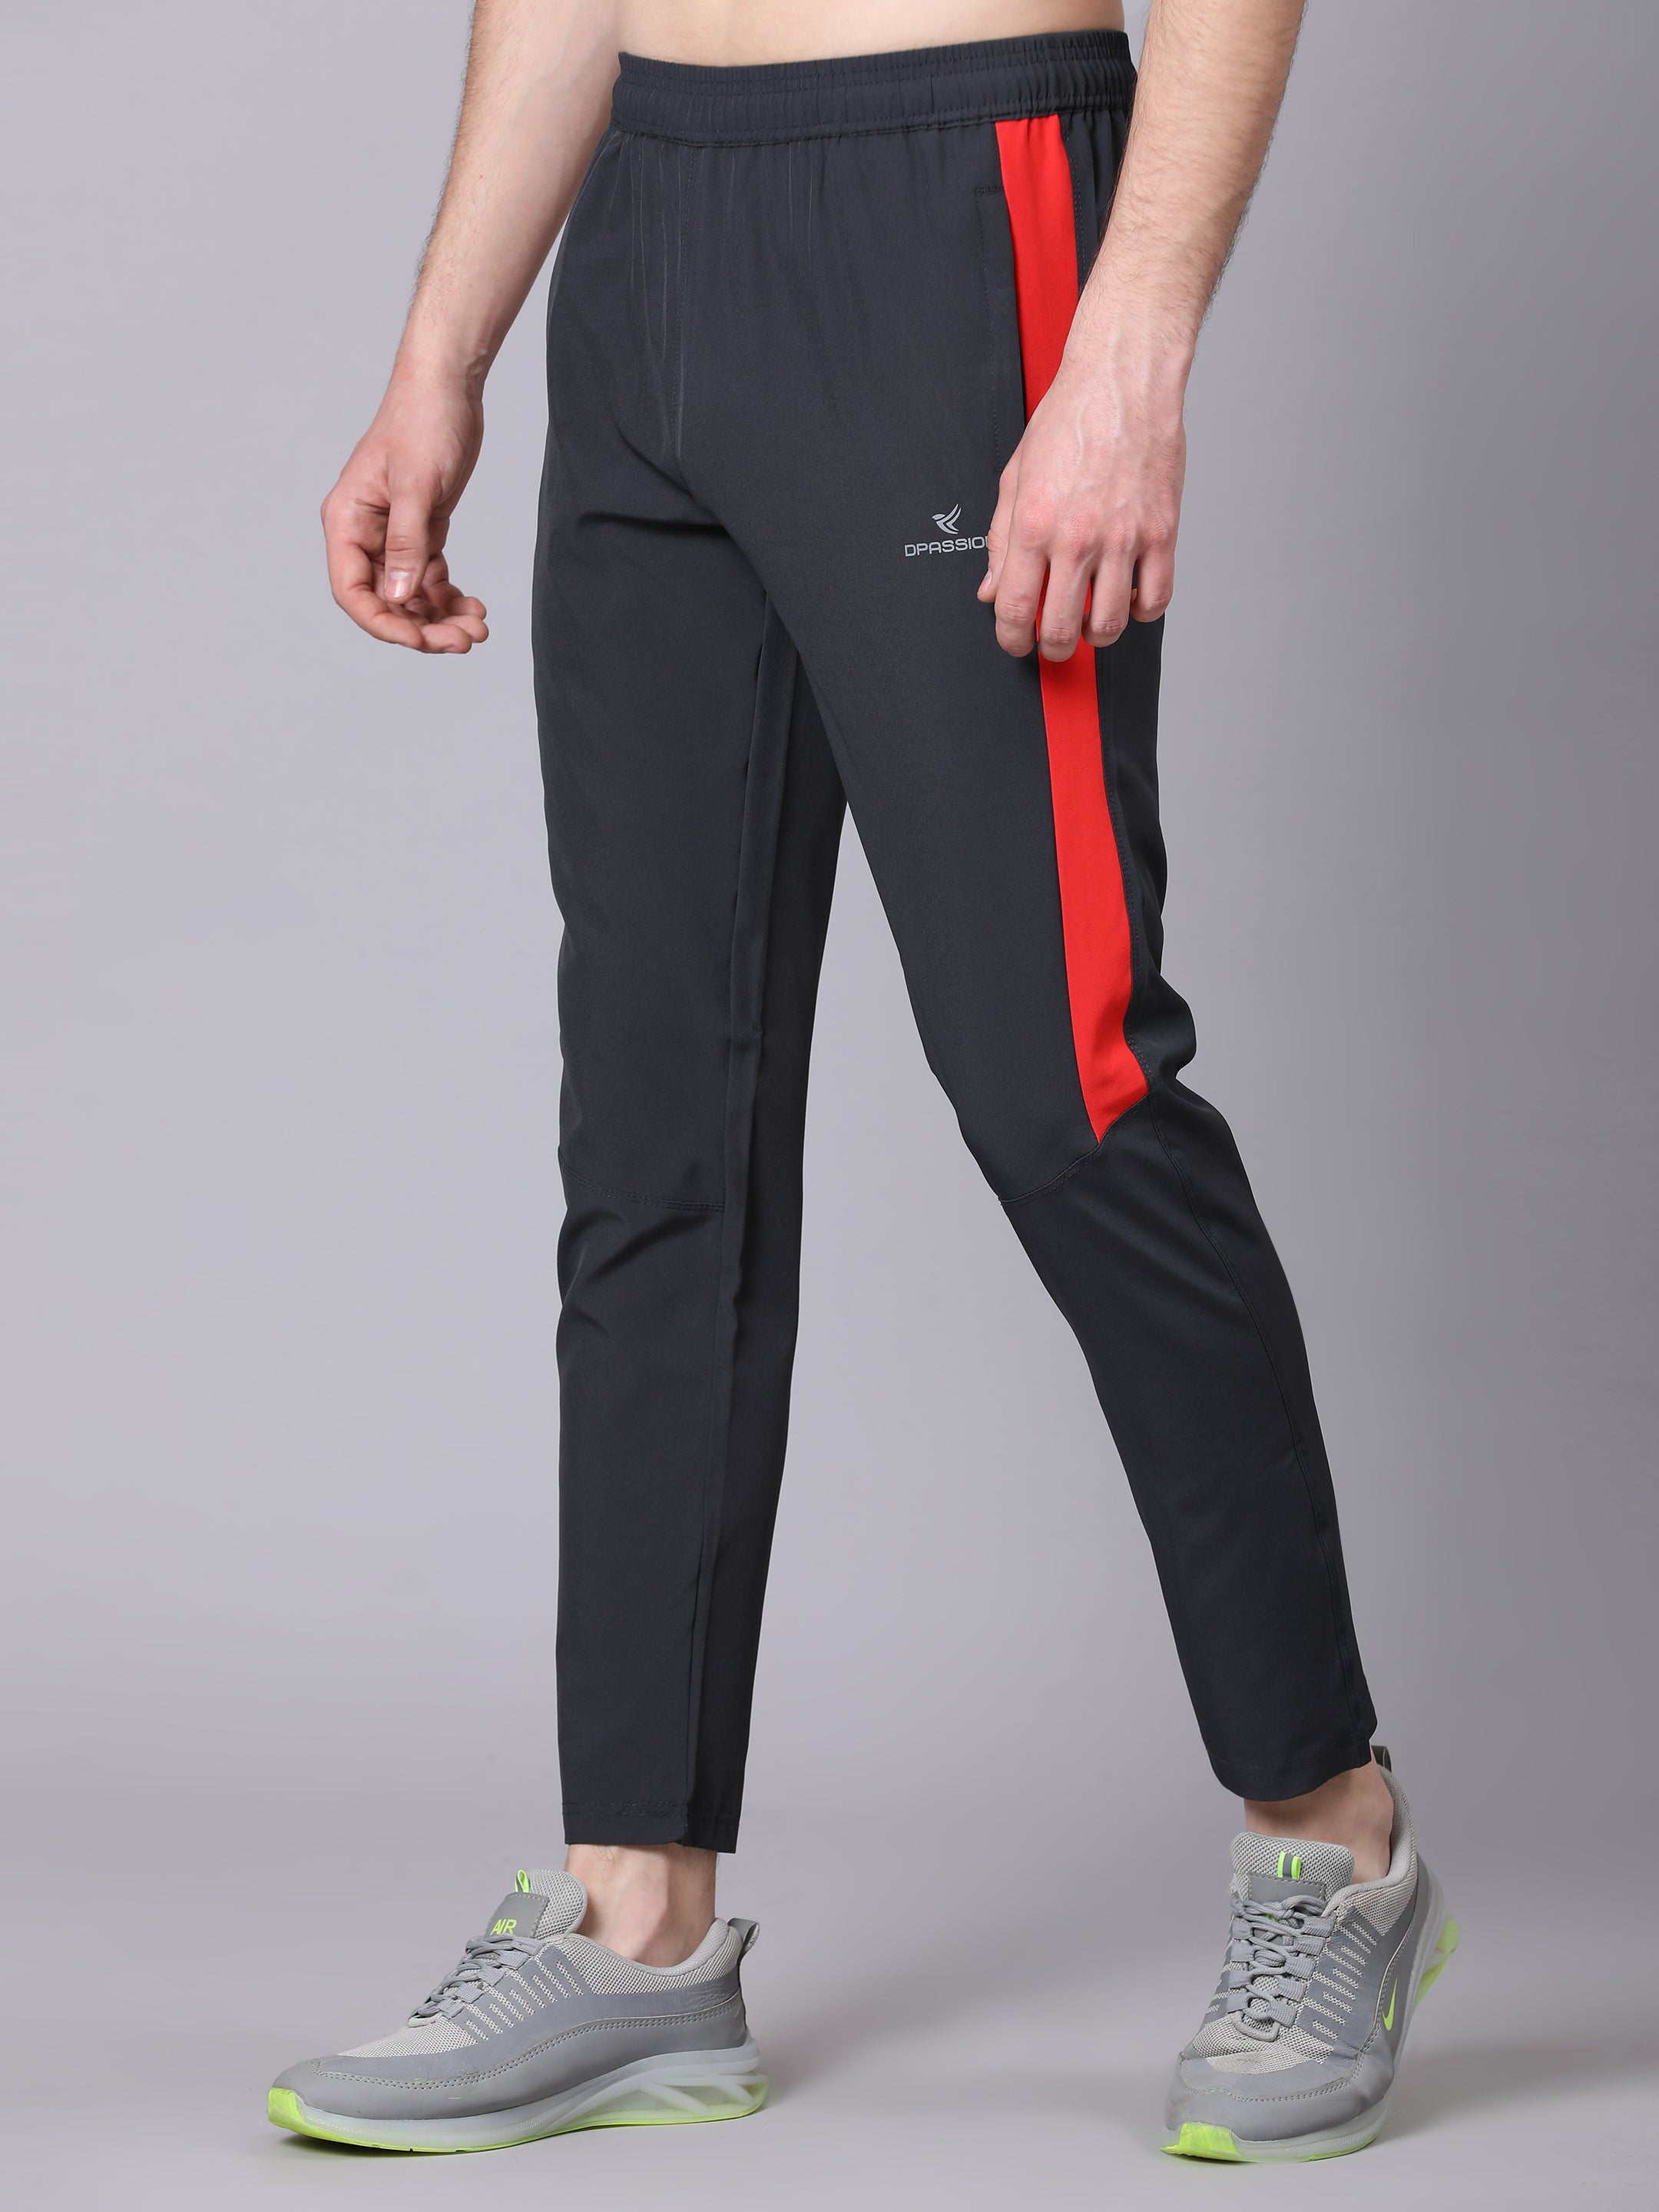 Regular Fit Casual Wear Dryfit Mens 4 Way Lycra Track Pants D No. 3138 in  Guwahati at best price by Sahil Garments - Justdial